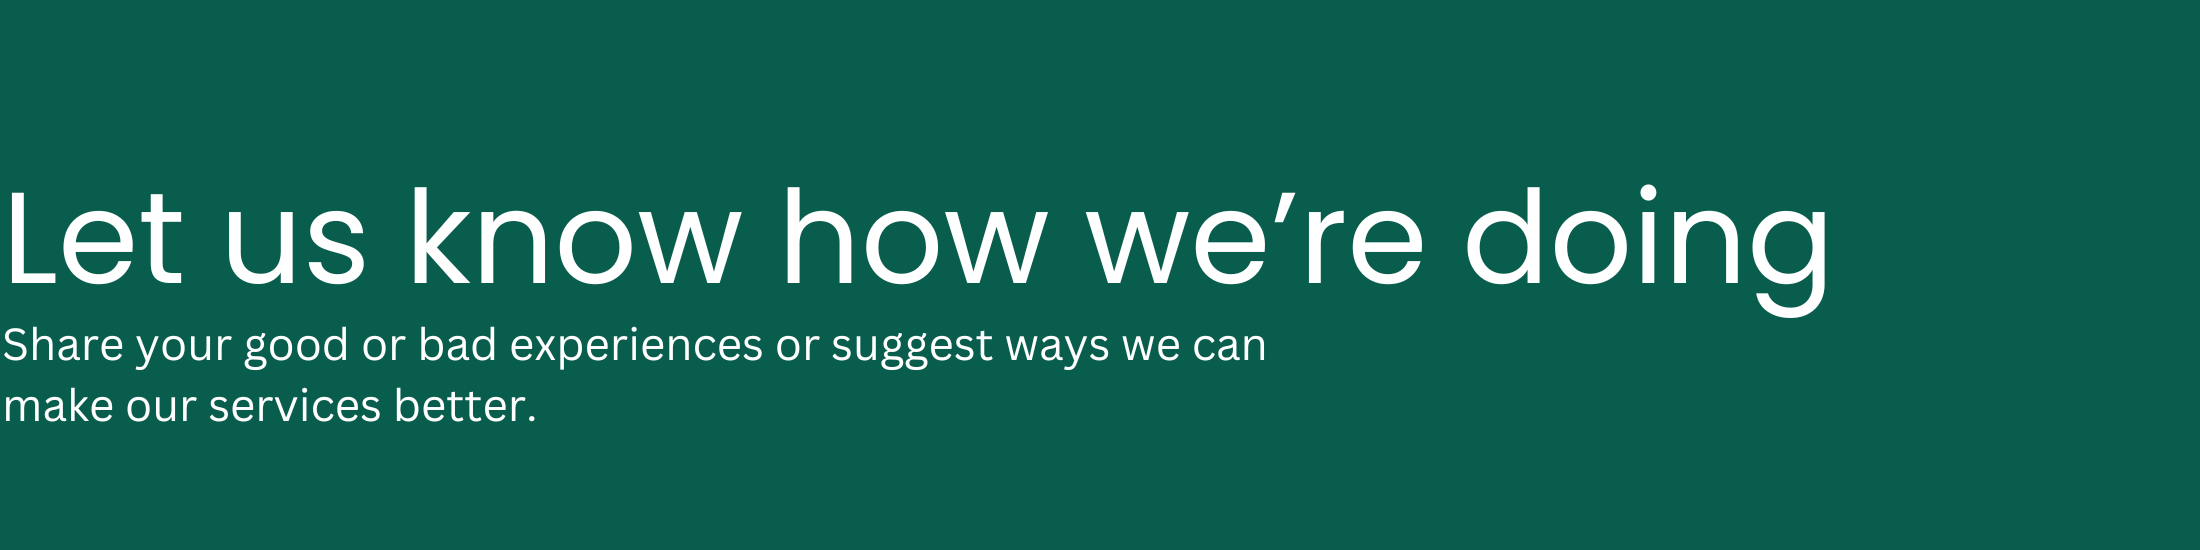 Green background and white text saying 'Let us know how we're doing. Share your good or bad experiences or suggest ways we can make our services better.'